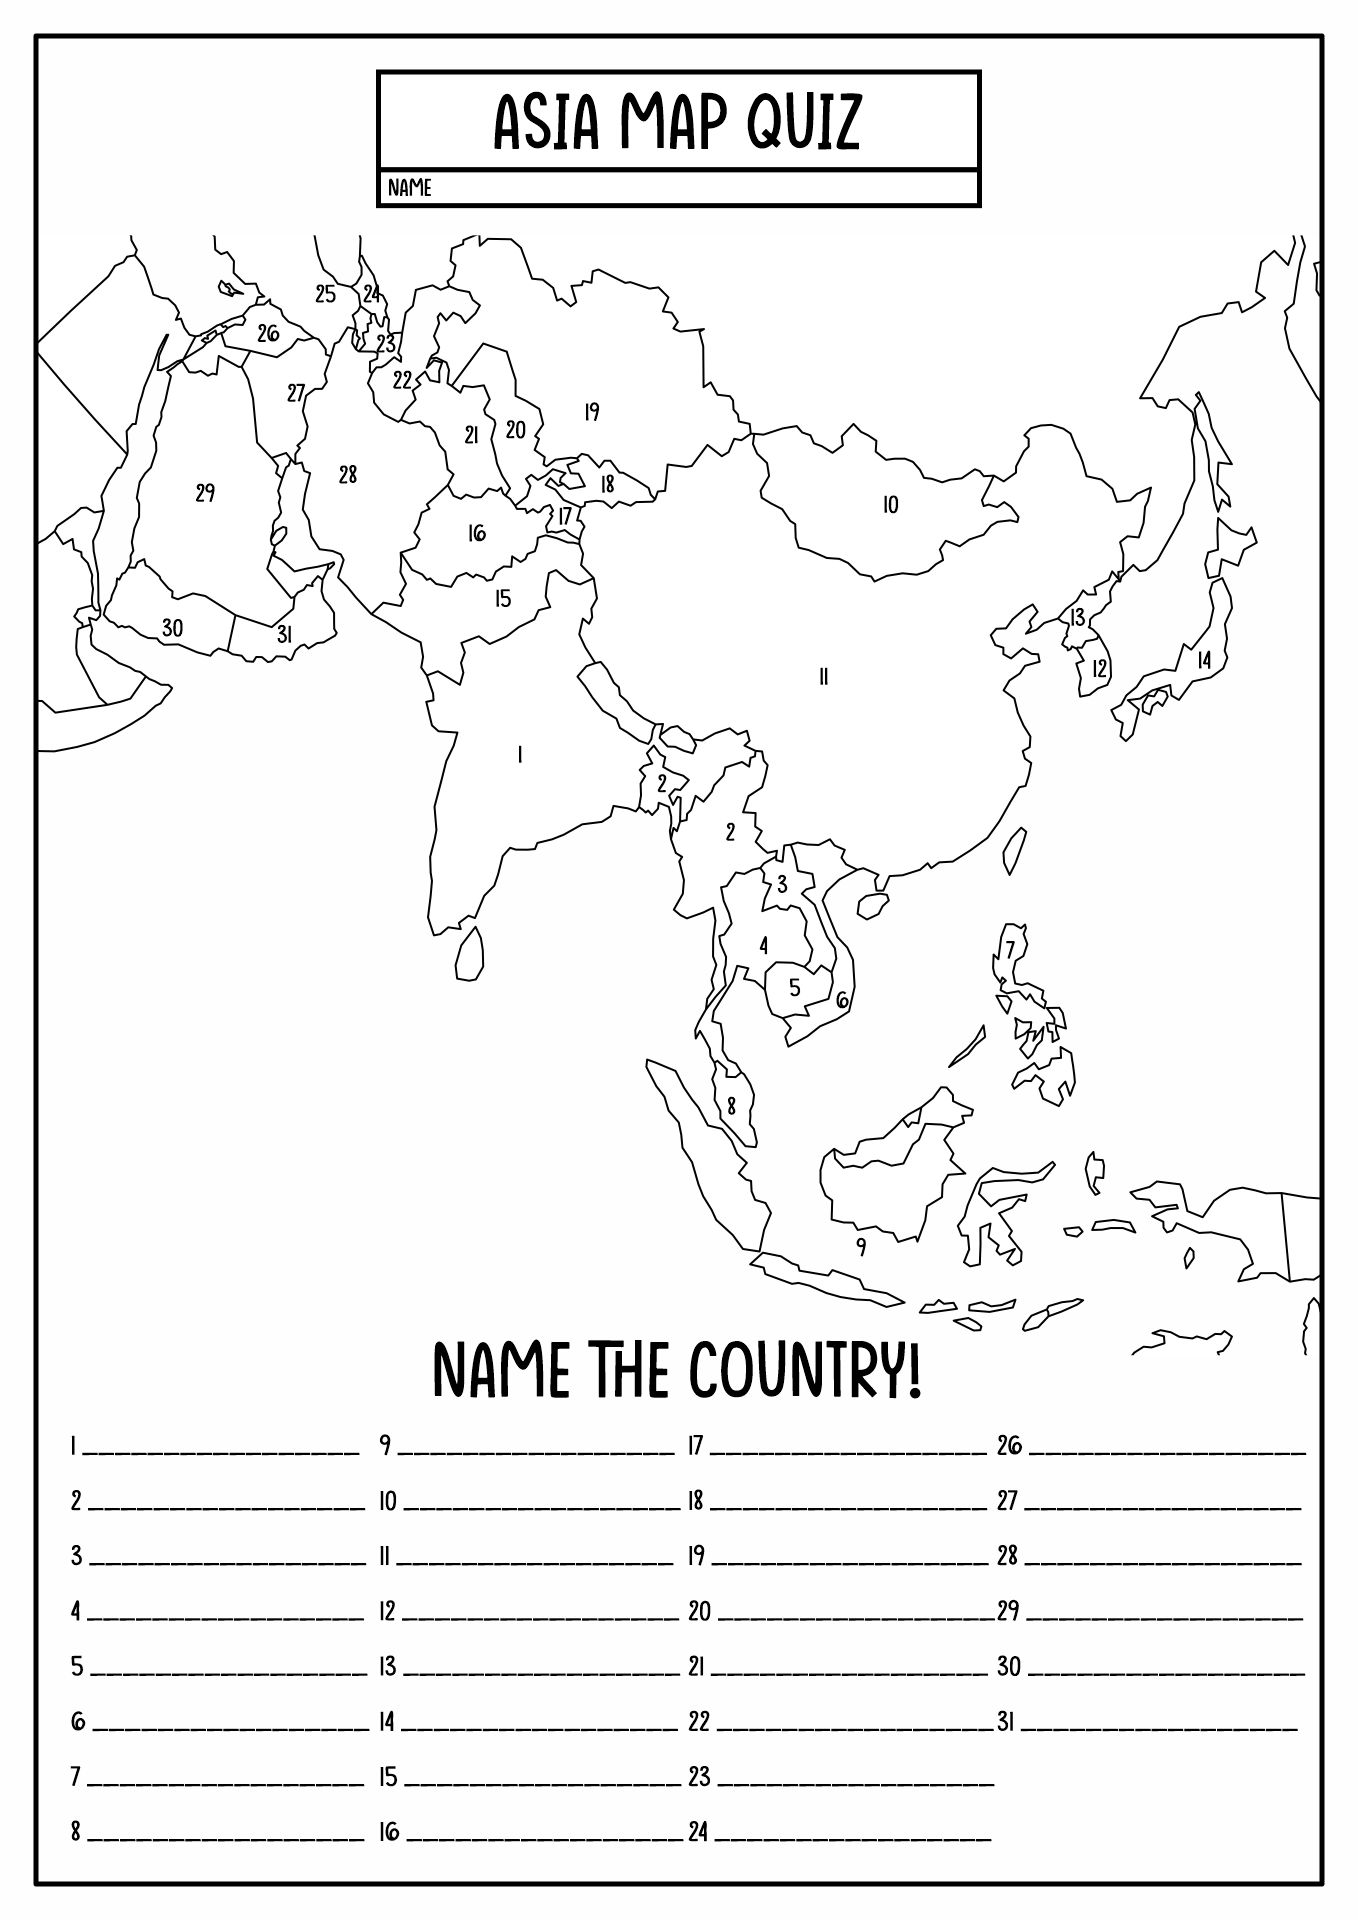 Blank Asia Map Quiz Image